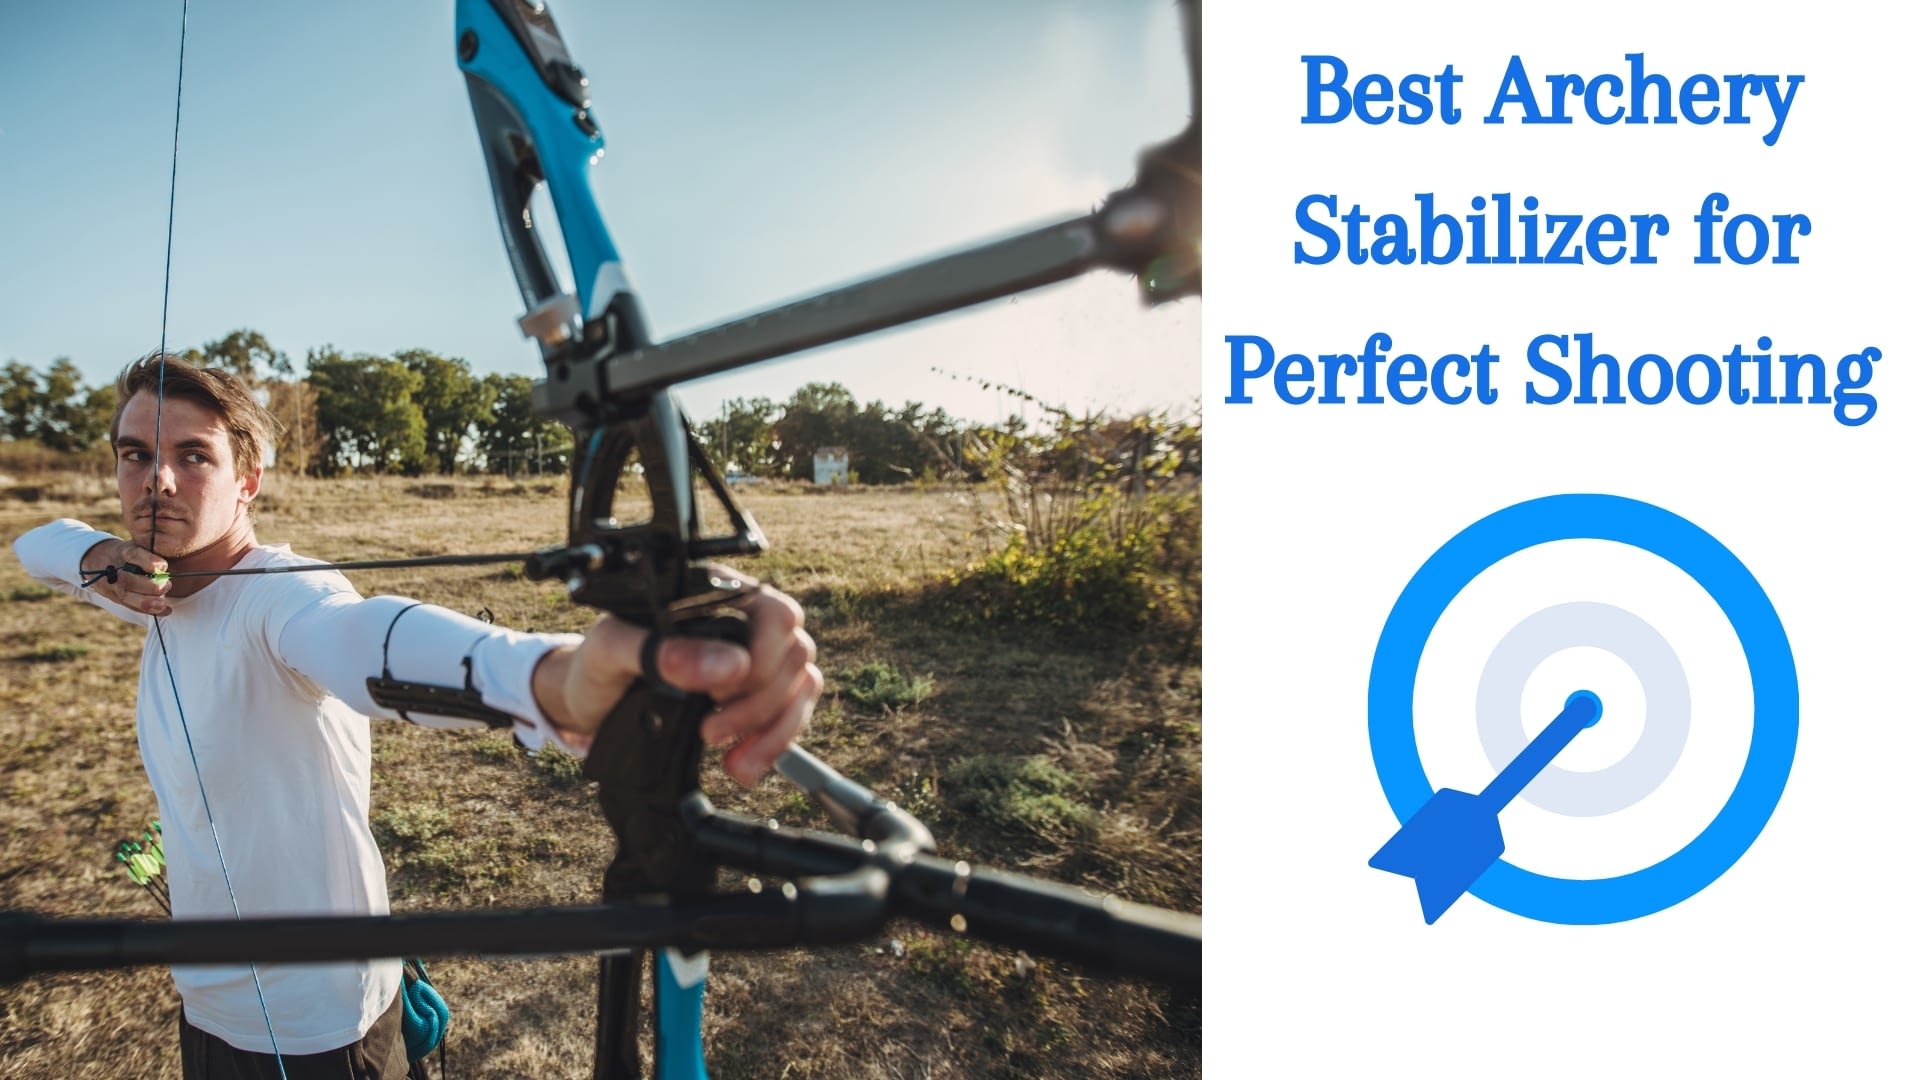 Best Archery Stabilizer for Perfect Shooting